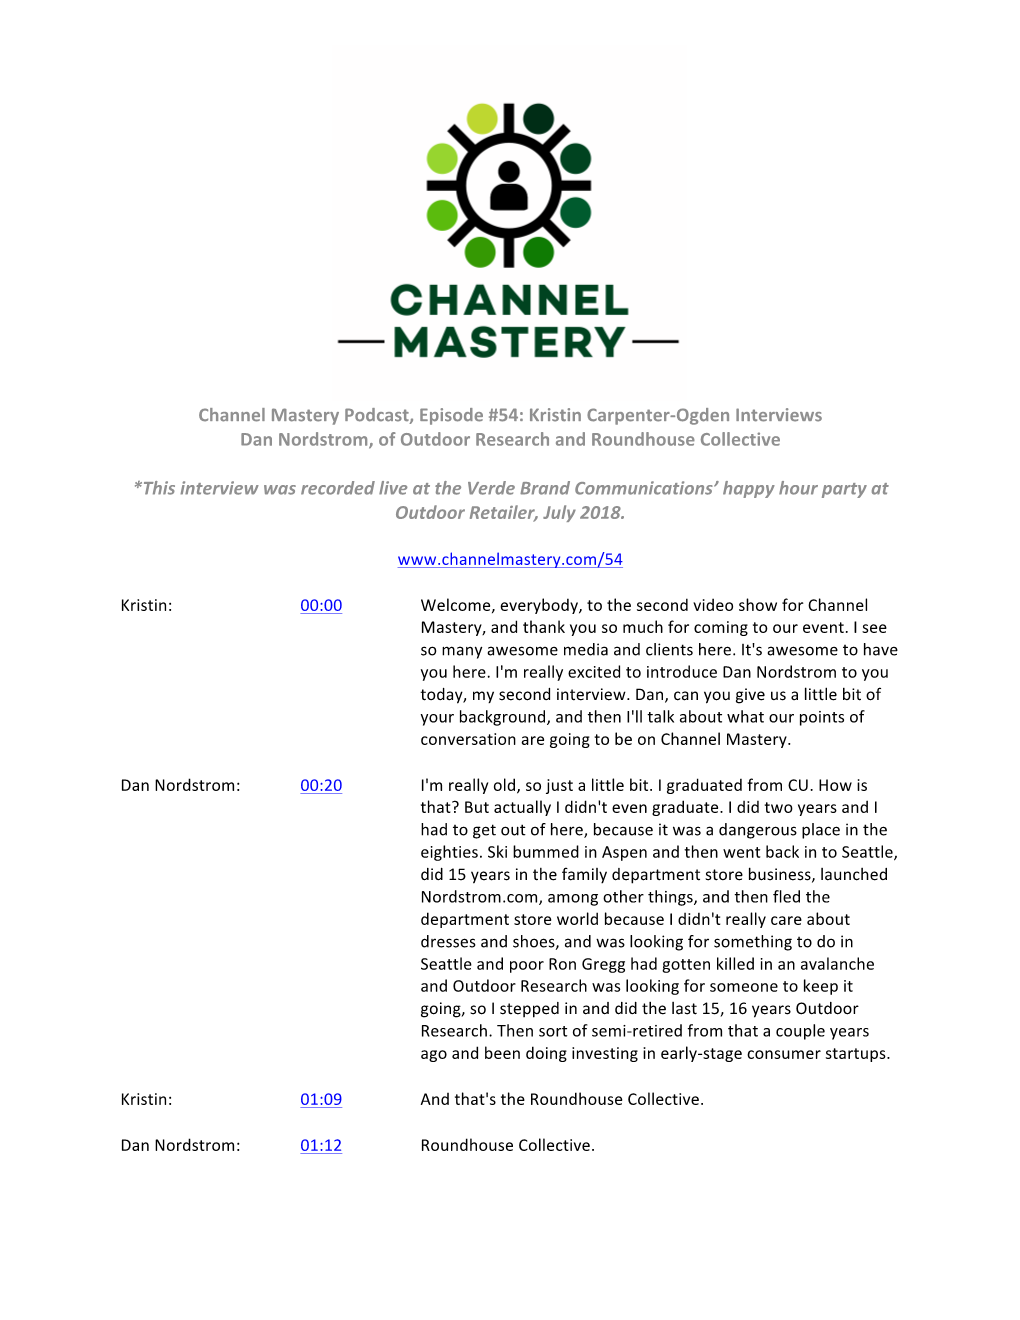 Channel Mastery Podcast, Episode #54: Kristin Carpenter-Ogden Interviews Dan Nordstrom, of Outdoor Research and Roundhouse Collective